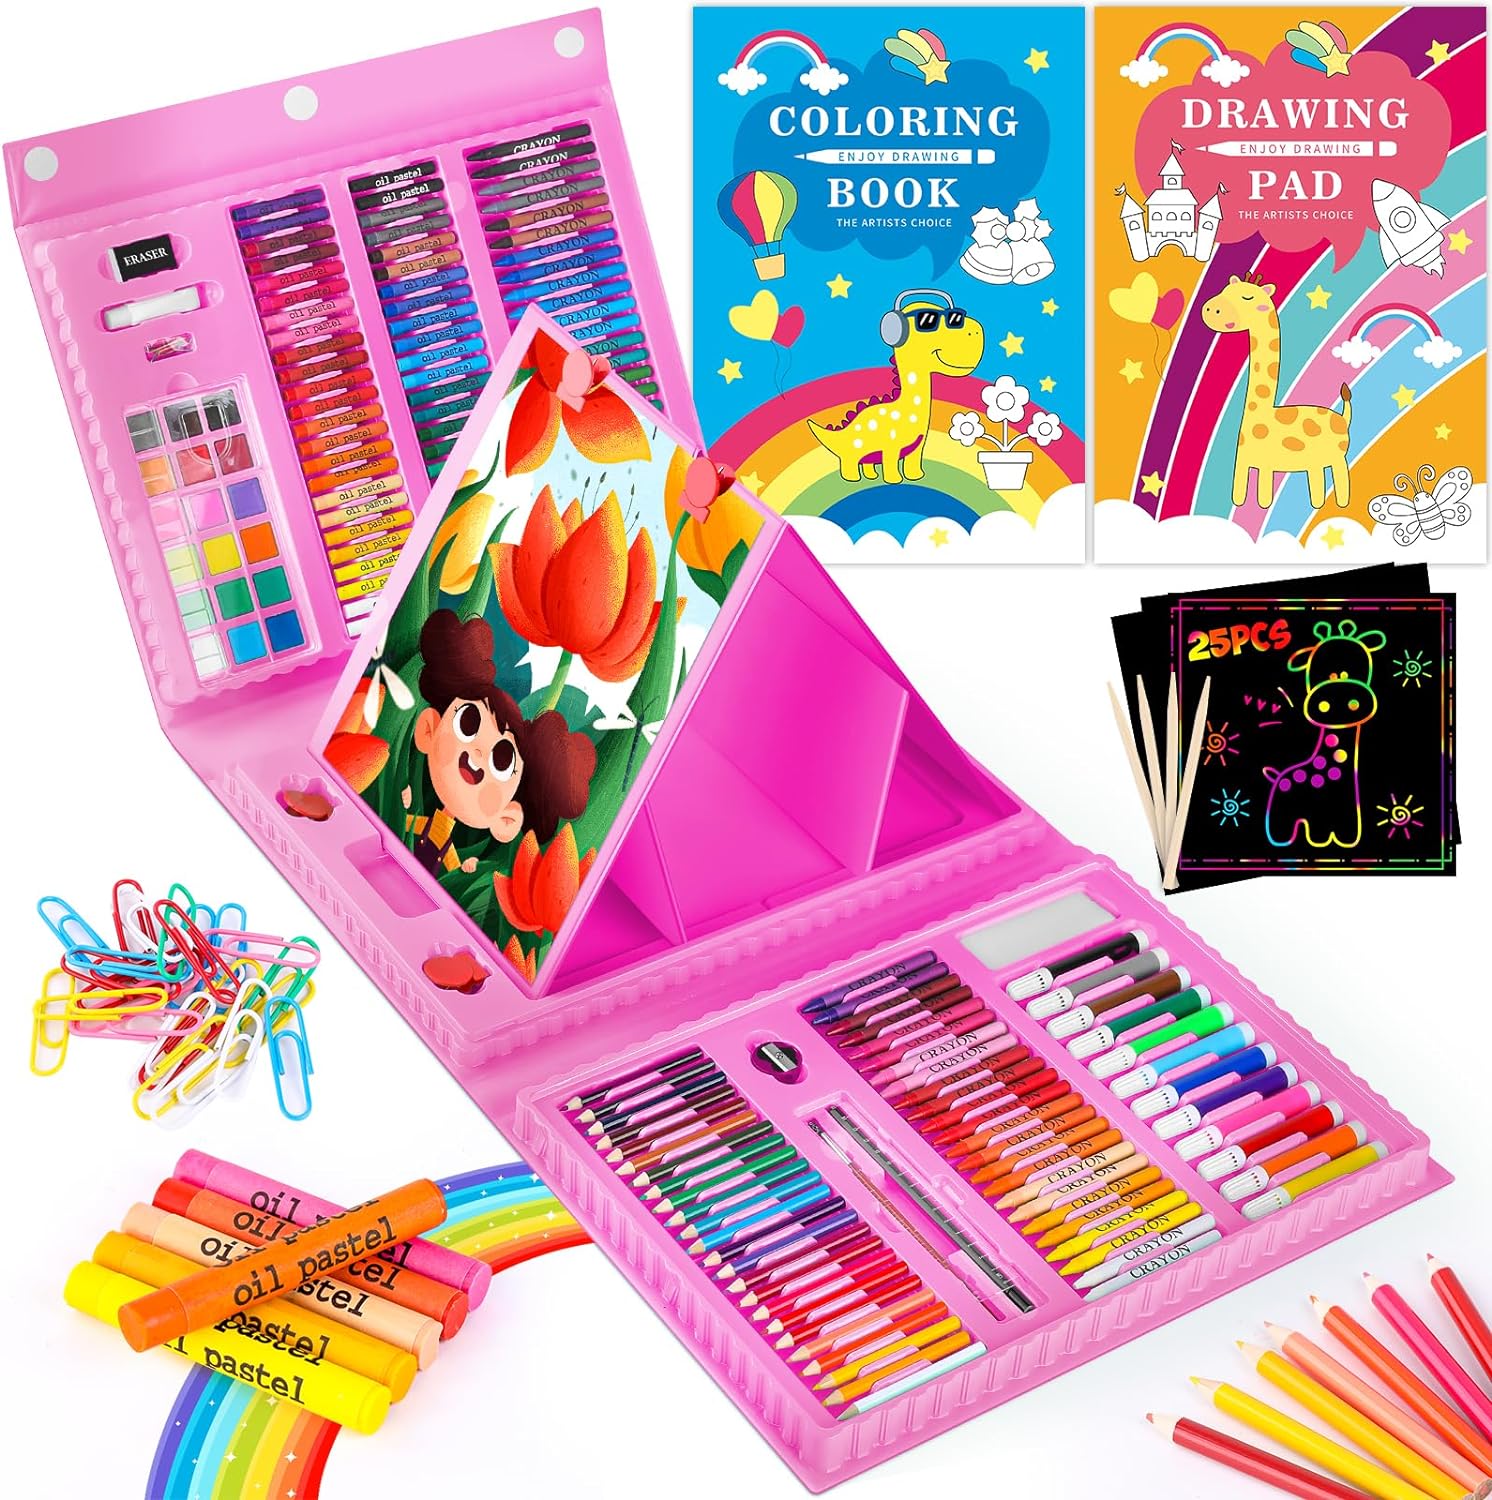 iBayam Art Kit, 251-Pack Art Supplies Drawing Kits, Arts and Crafts Gifts Box for Kids Teen Girls Boys, Art Set Case with Trifold Easel, Scratch Paper, Sketch Pad, Coloring Book, Crayons, Pencils